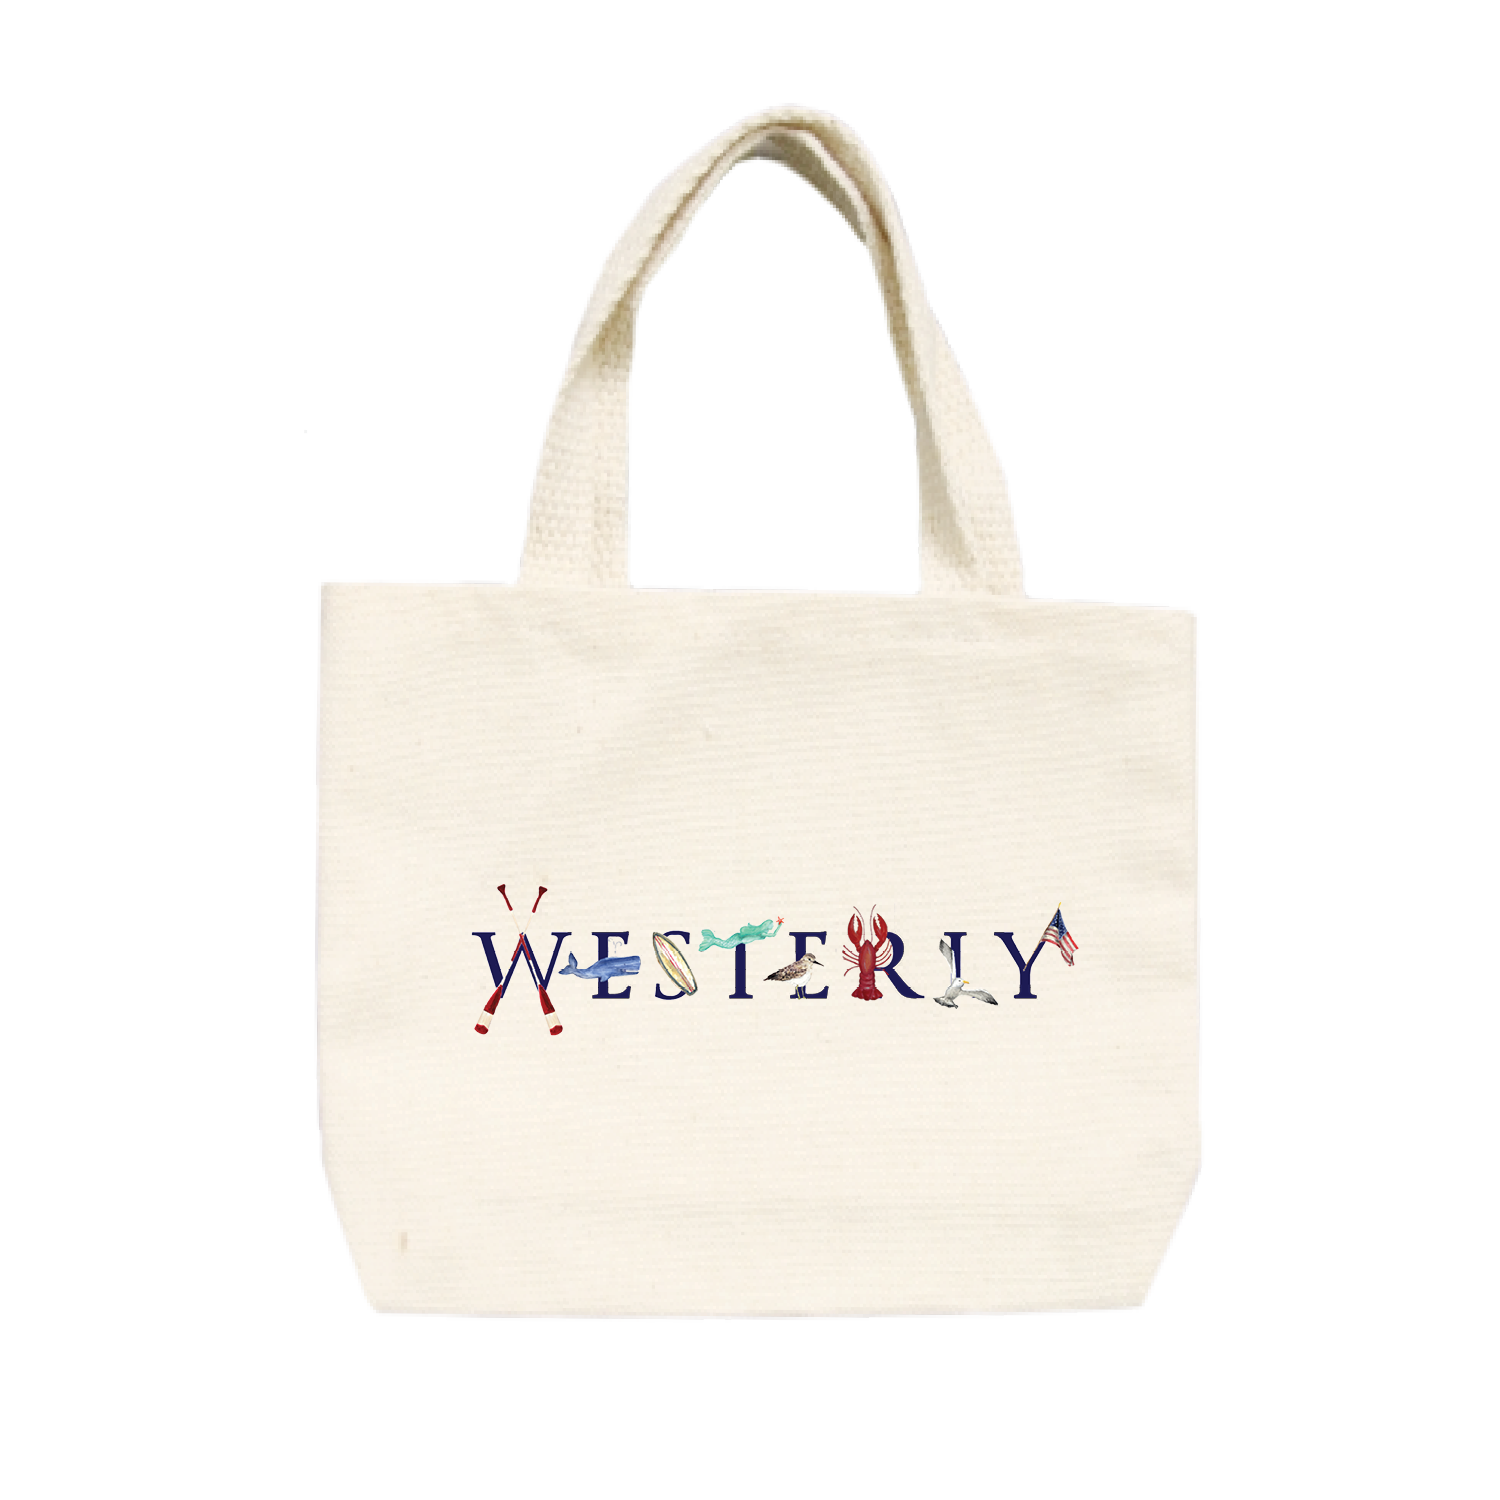 Westerly small tote